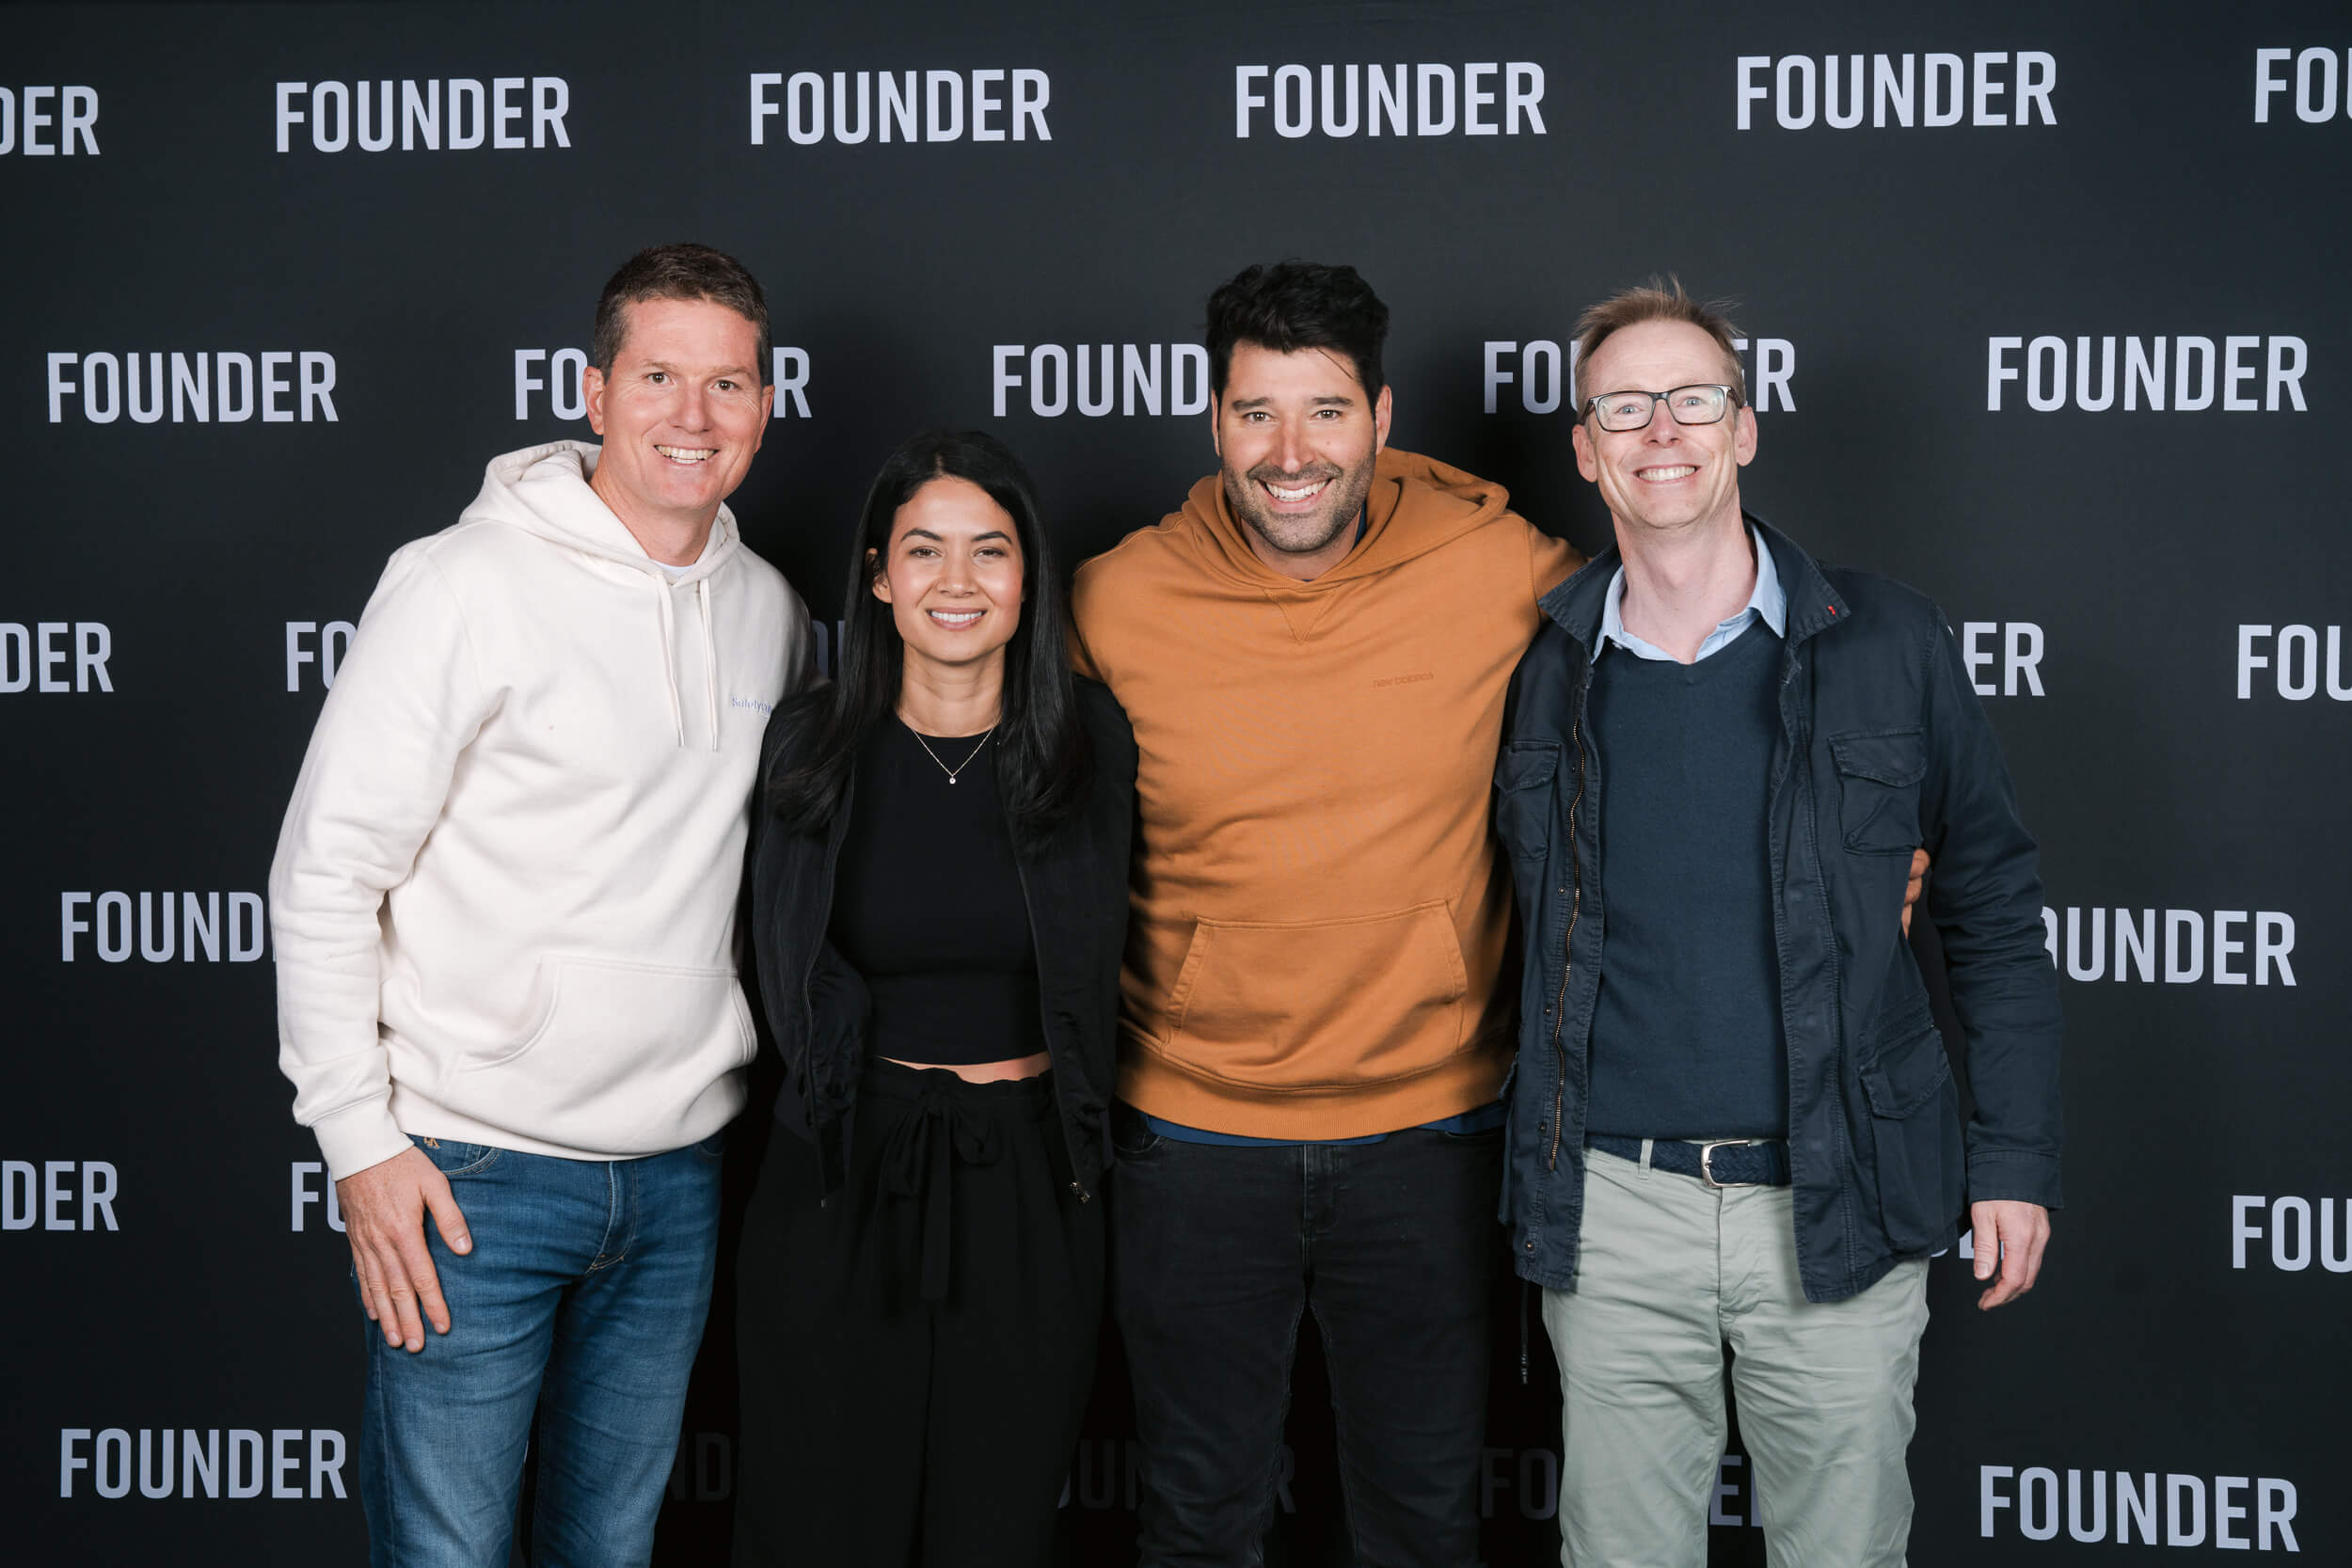 Founder Sydney premiere with founders Luke Anear of SafetyCulture, Melanie Perkins and Cliff Oberecht of Canva, and Rick Baker of Blackbird Ventures.